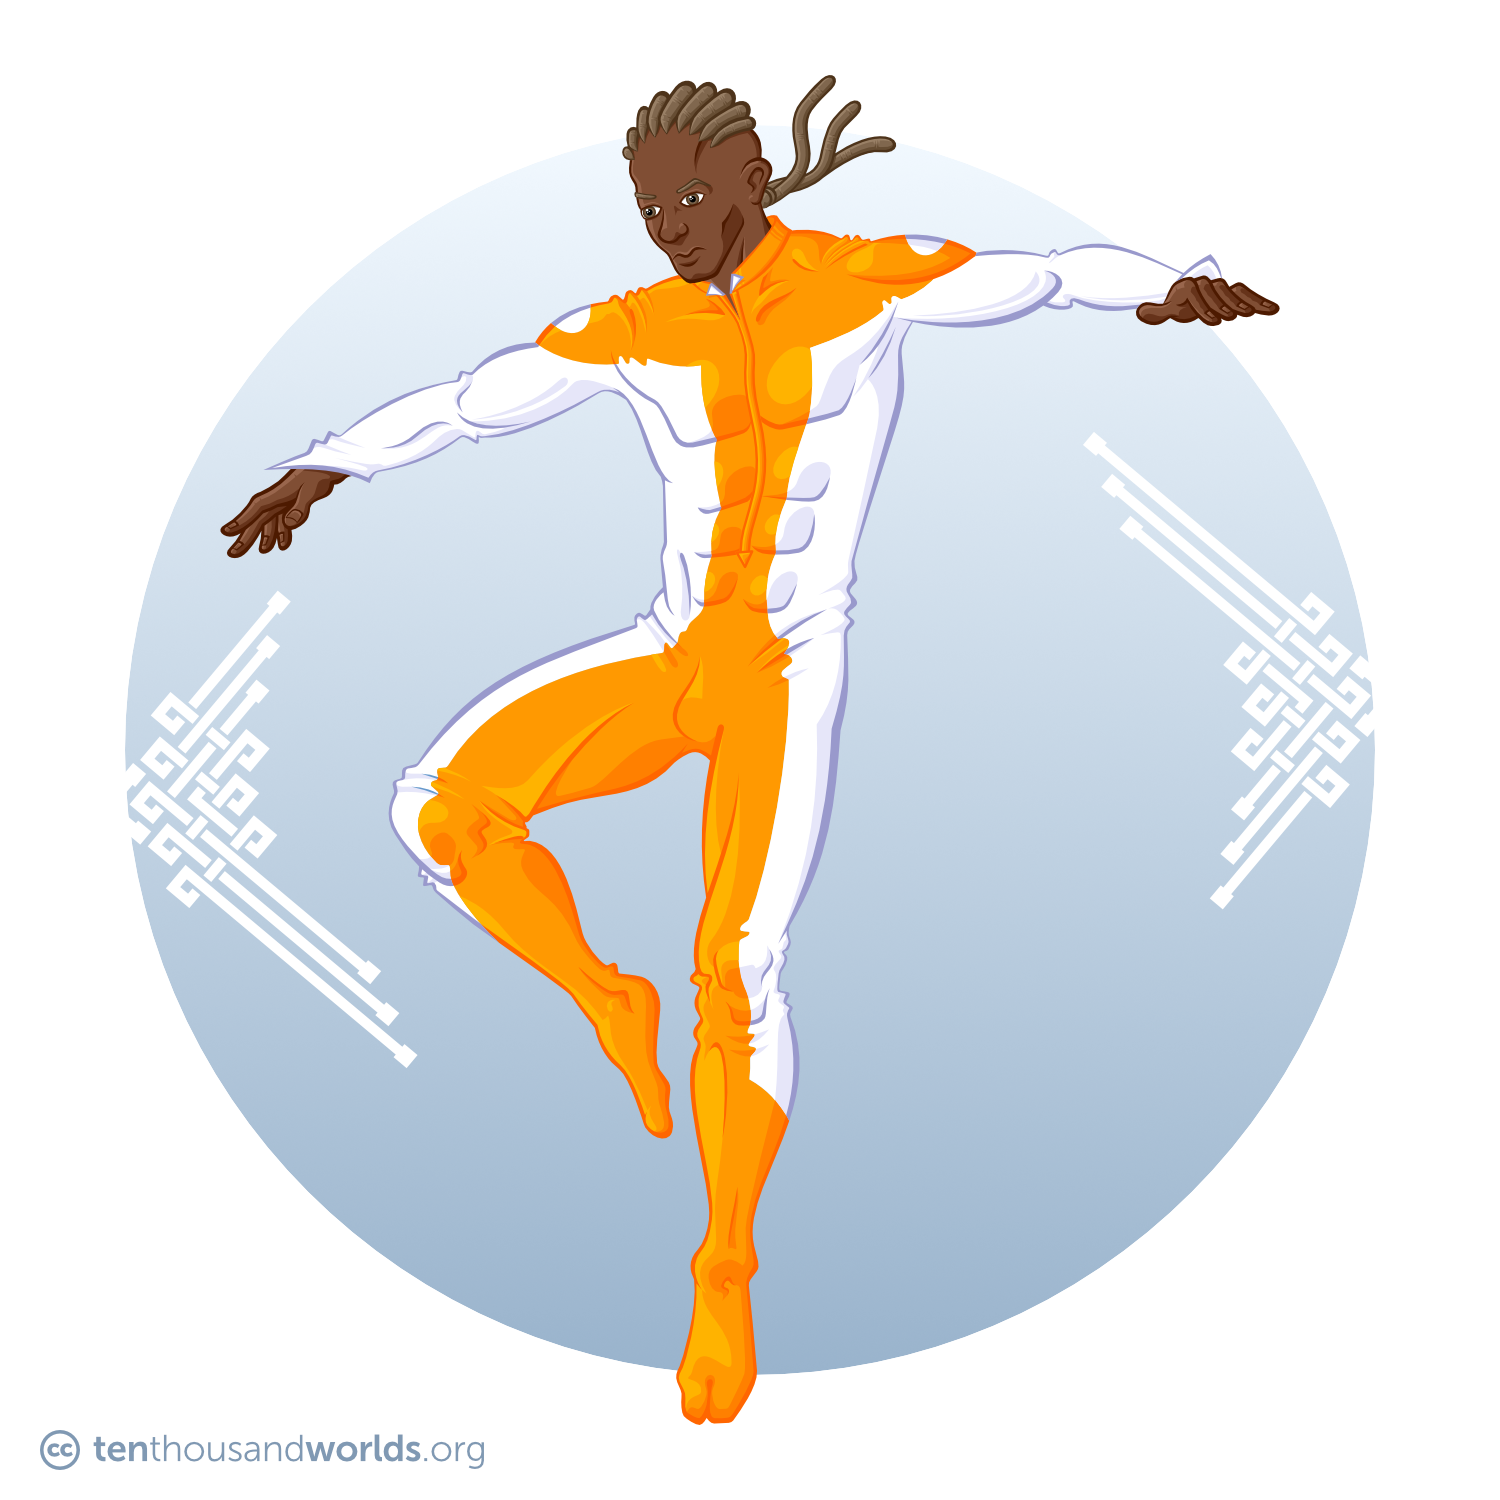 A man with the sides of his head shaved, the rest of his hair styled in corn rows that end in long braids off his back. He wears a one-piece orange and white jump-suit as he floats in mid-air.